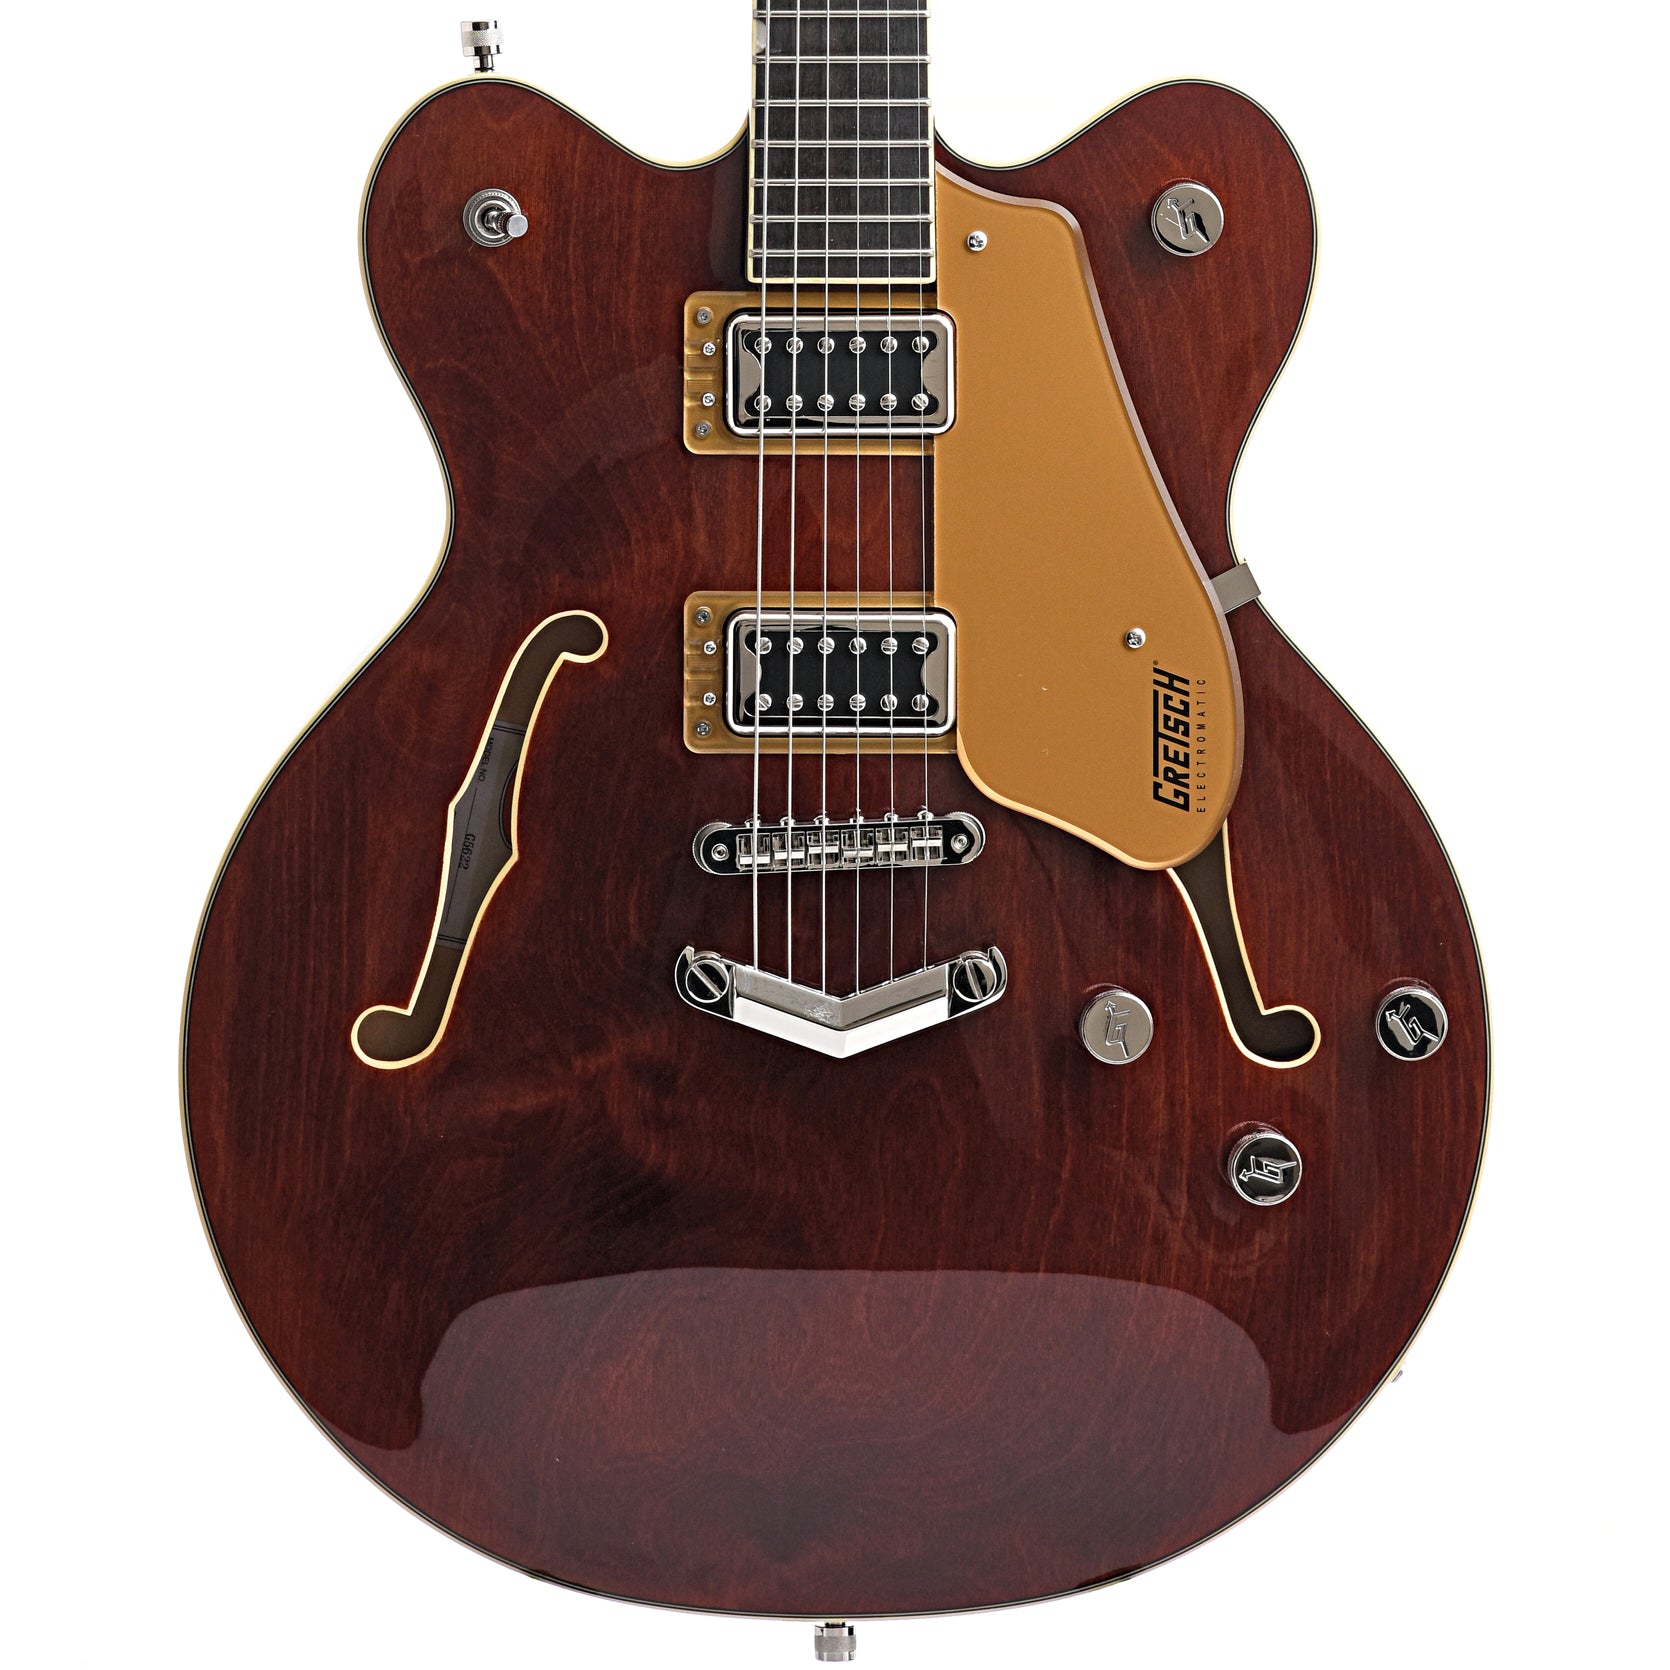 Image 2 of Gretsch G5622 Electromatic Center Block Double Cut with V-Stoptail, Aged Walnut - SKU# G5622-AW : Product Type Hollow Body Electric Guitars : Elderly Instruments